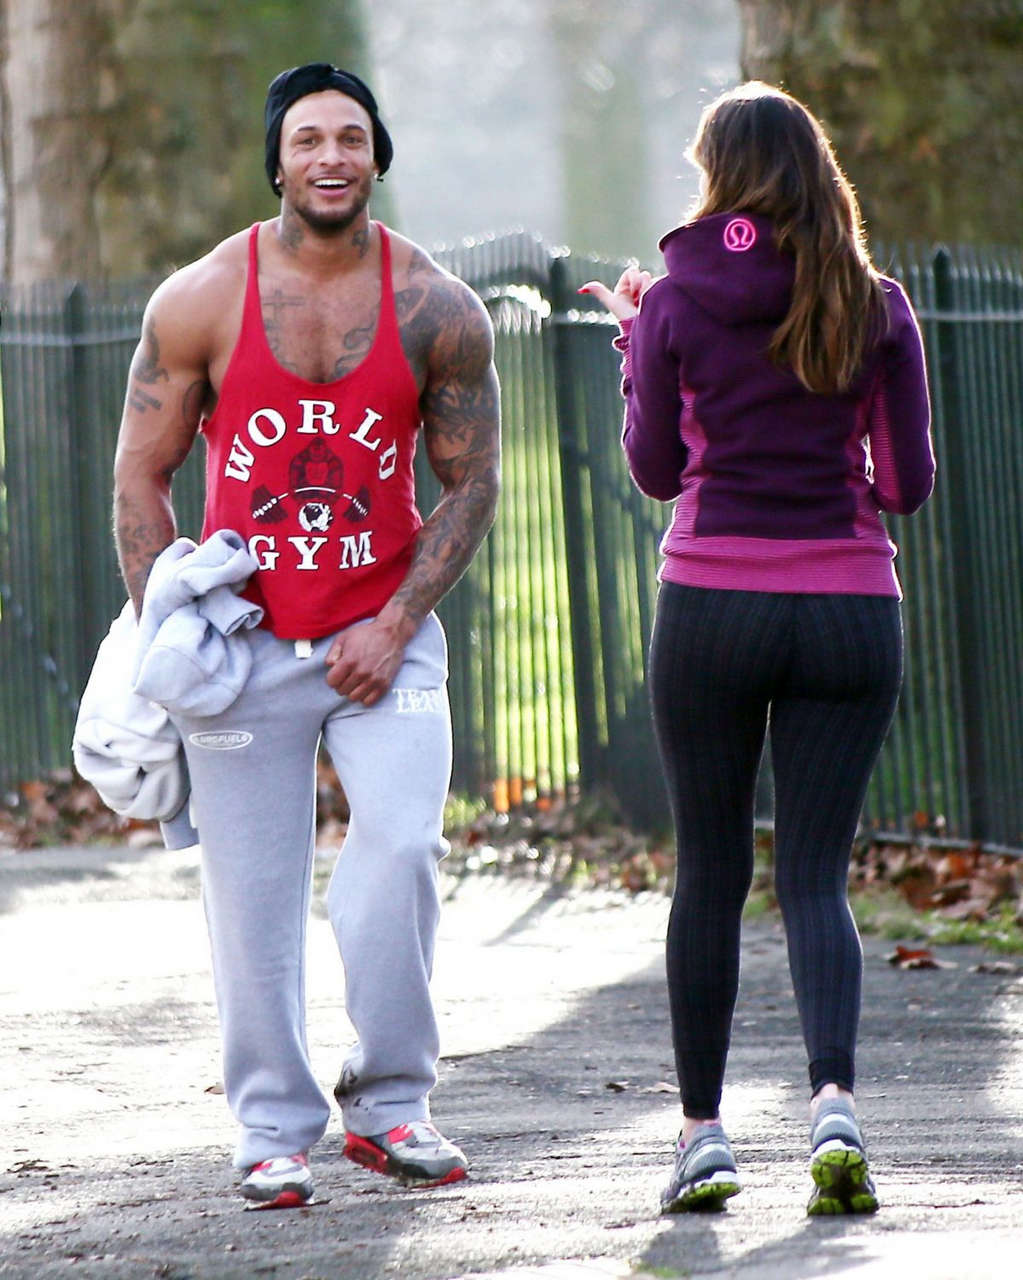 Kelly Brook Leggings Working Out With David Mcintosh London